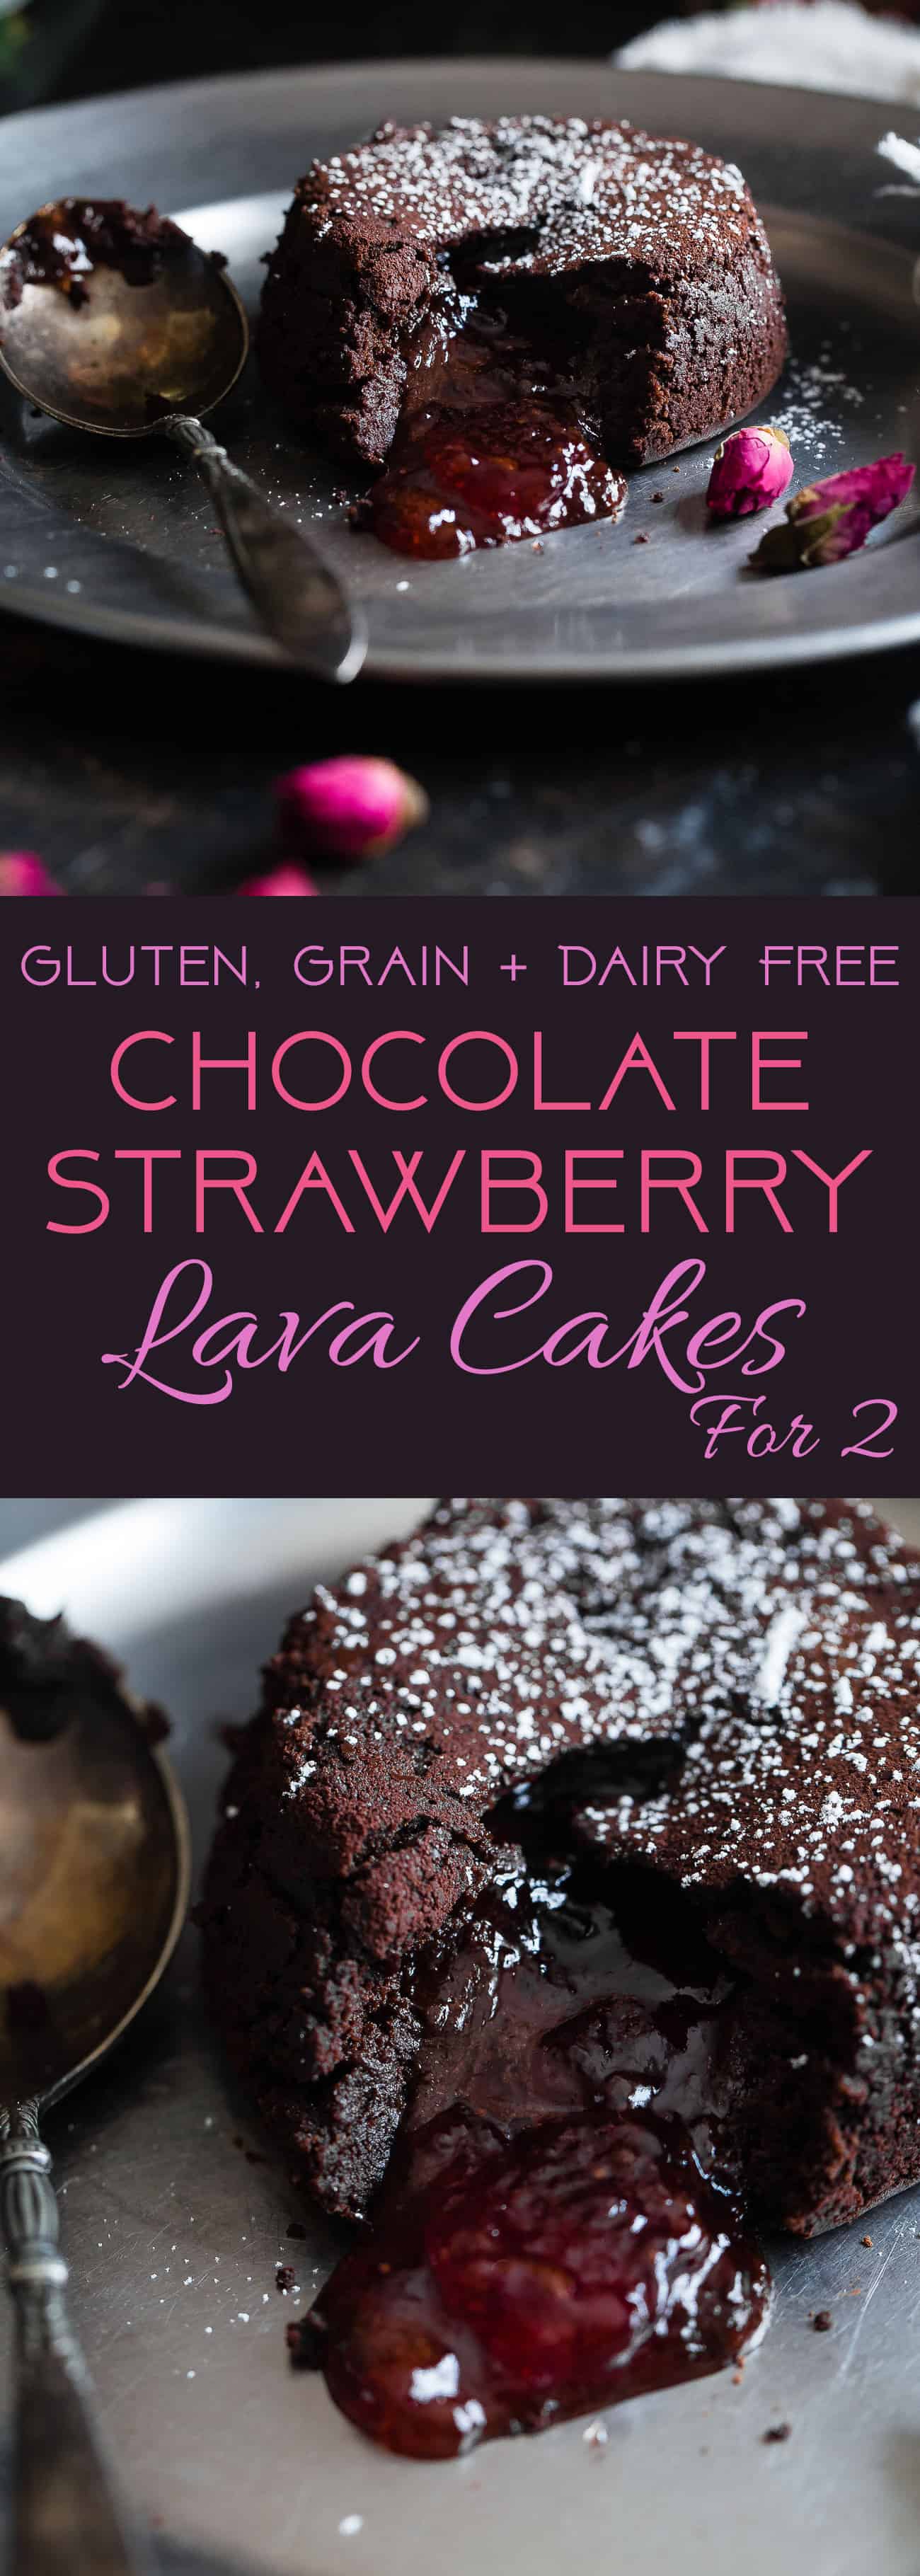 Gluten Free Chocolate Strawberry Lava Cakes for Two - These ooey-gooey, rich and FUDGY lava cakes are a 15 minute dessert that feels SO fancy! They're gluten/grain/dairy free and better for you too! | #Foodfaithfitness | #Glutenfree #Lavacake #ValentinesDay #Strawberry #DairyFree